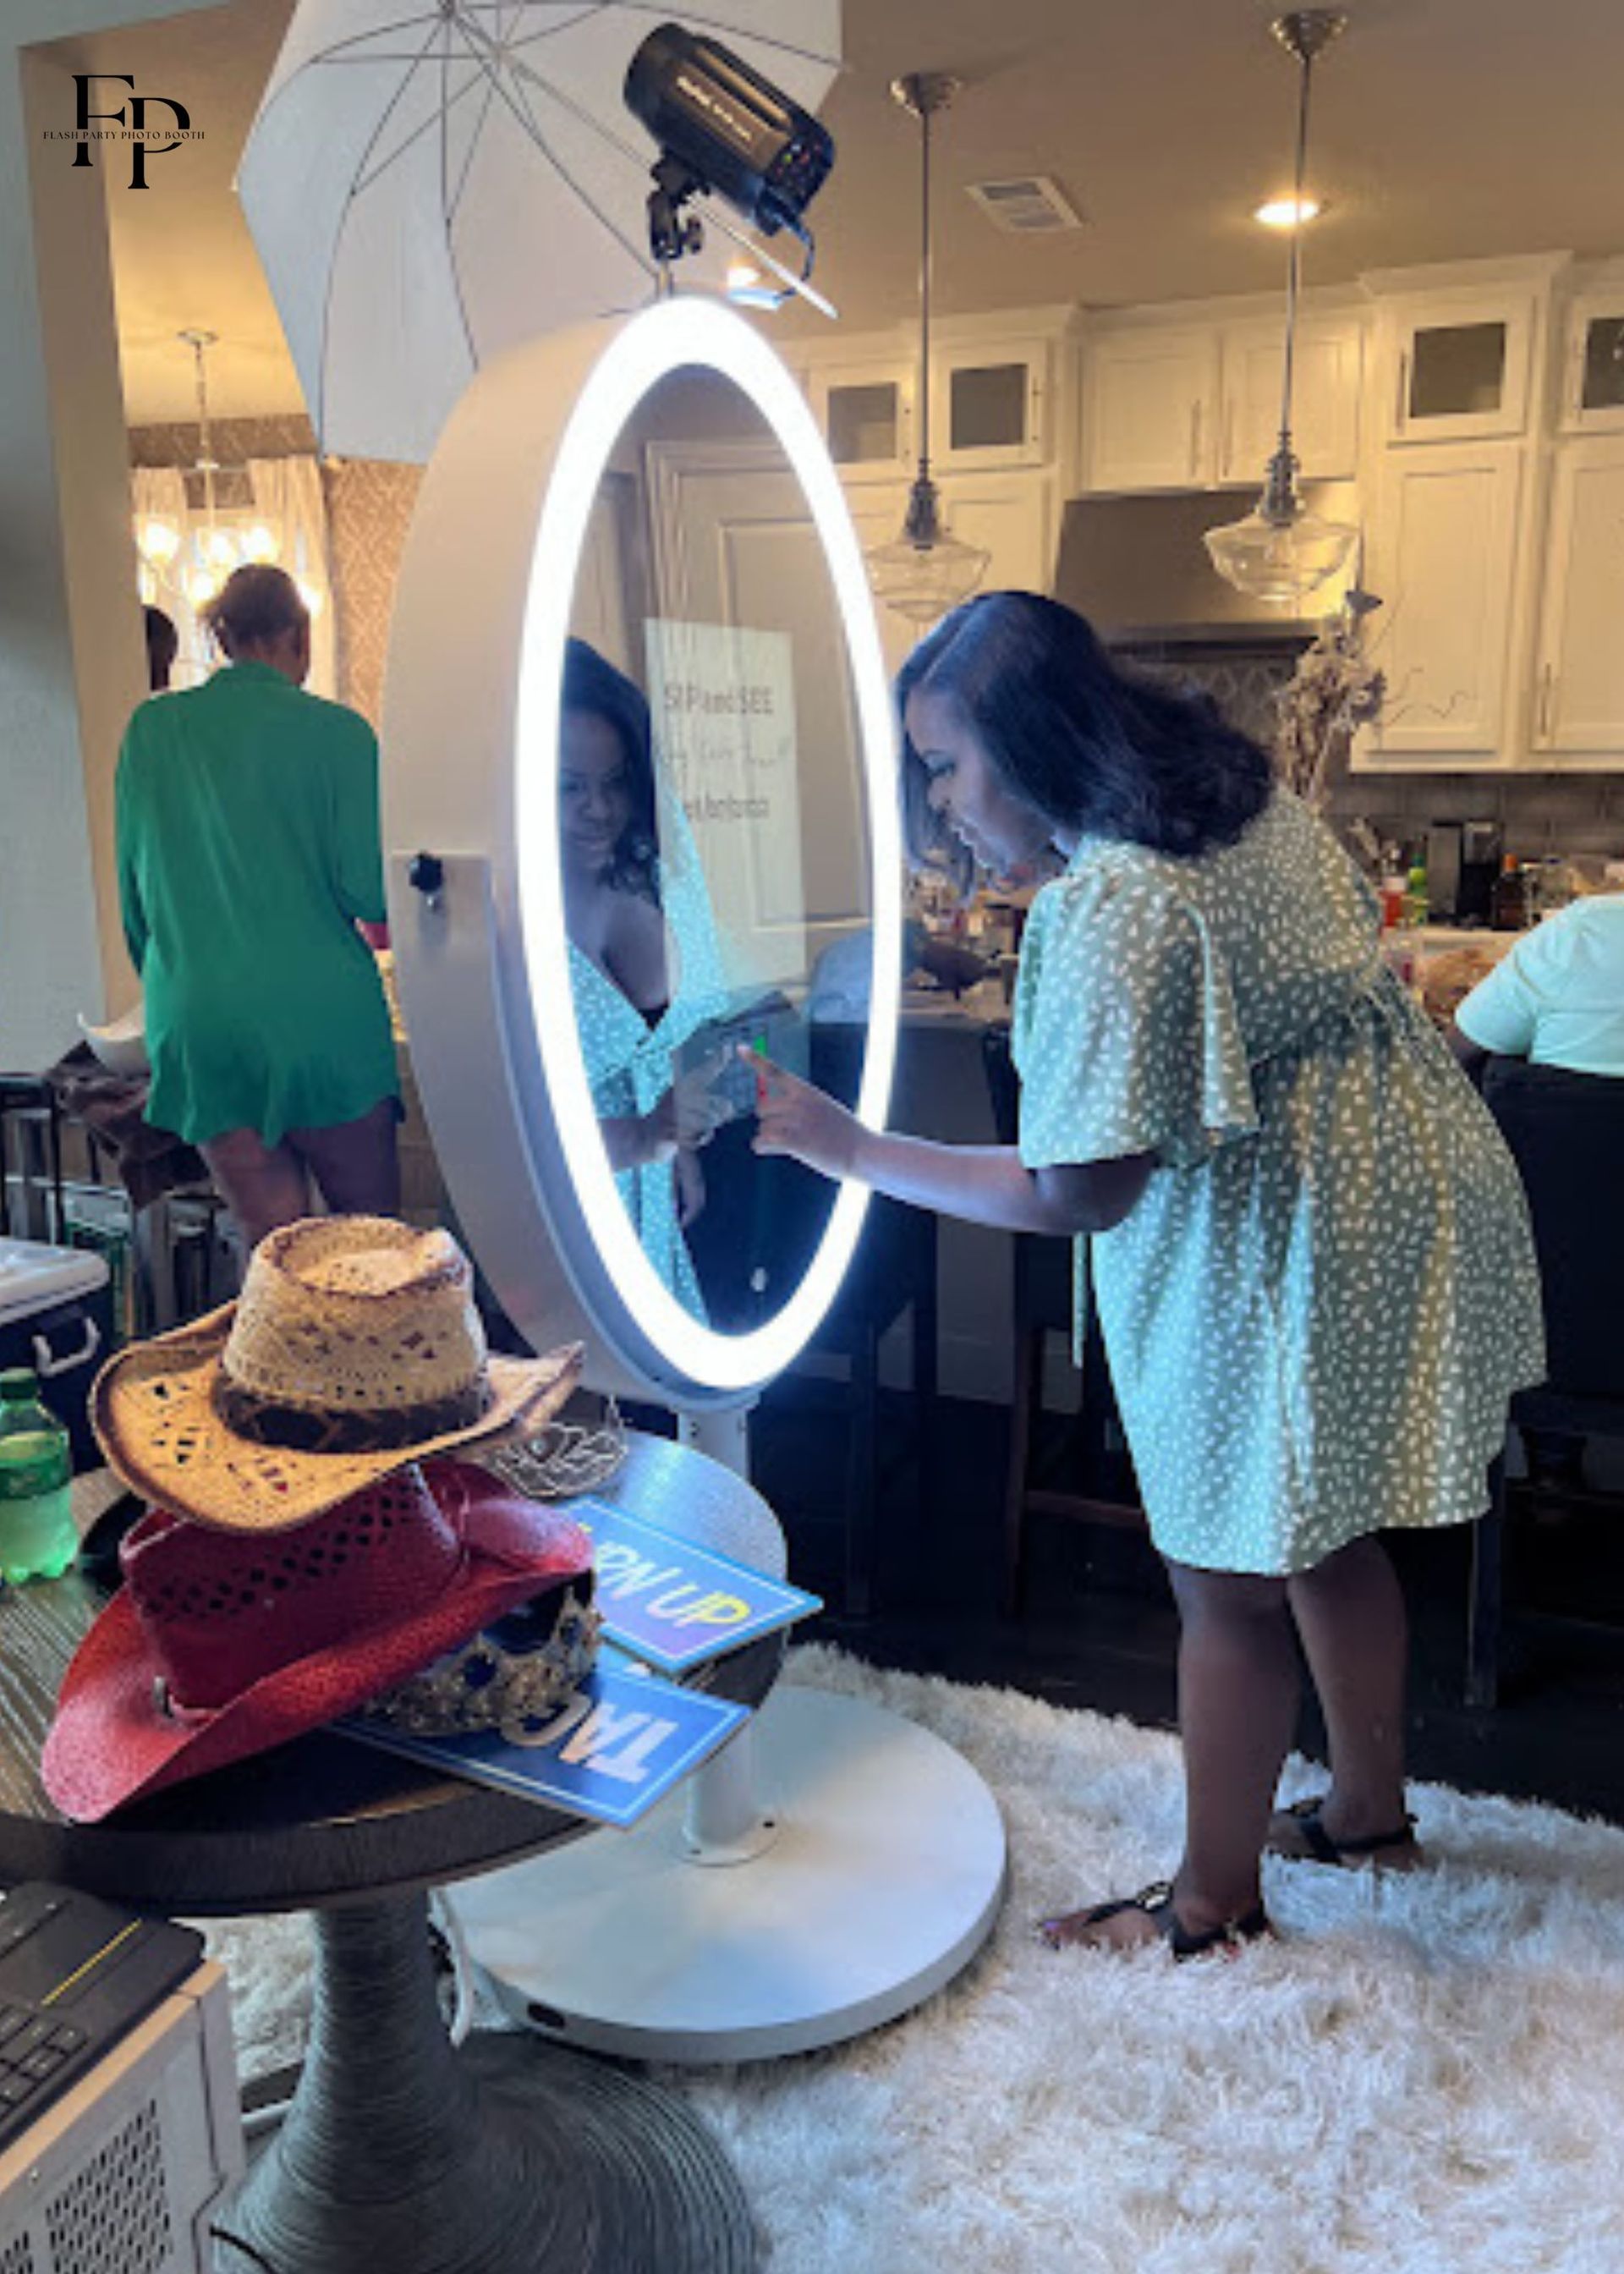 A woman getting ready to pose for a photo at an Oval Mirror Photo Booth.